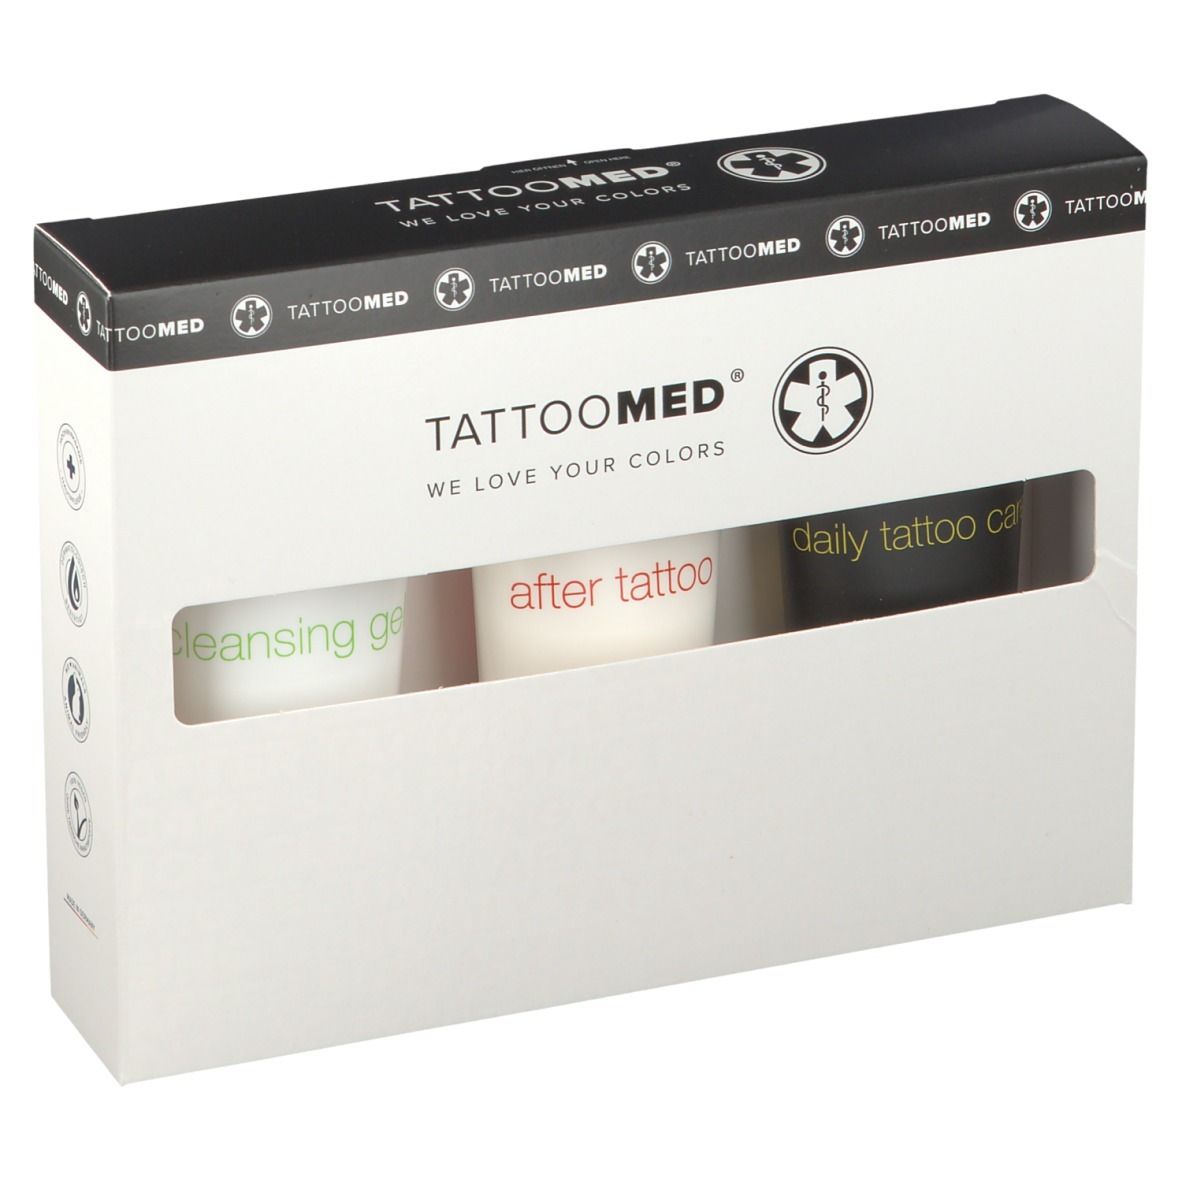 TattooMed® all in bundle CARE